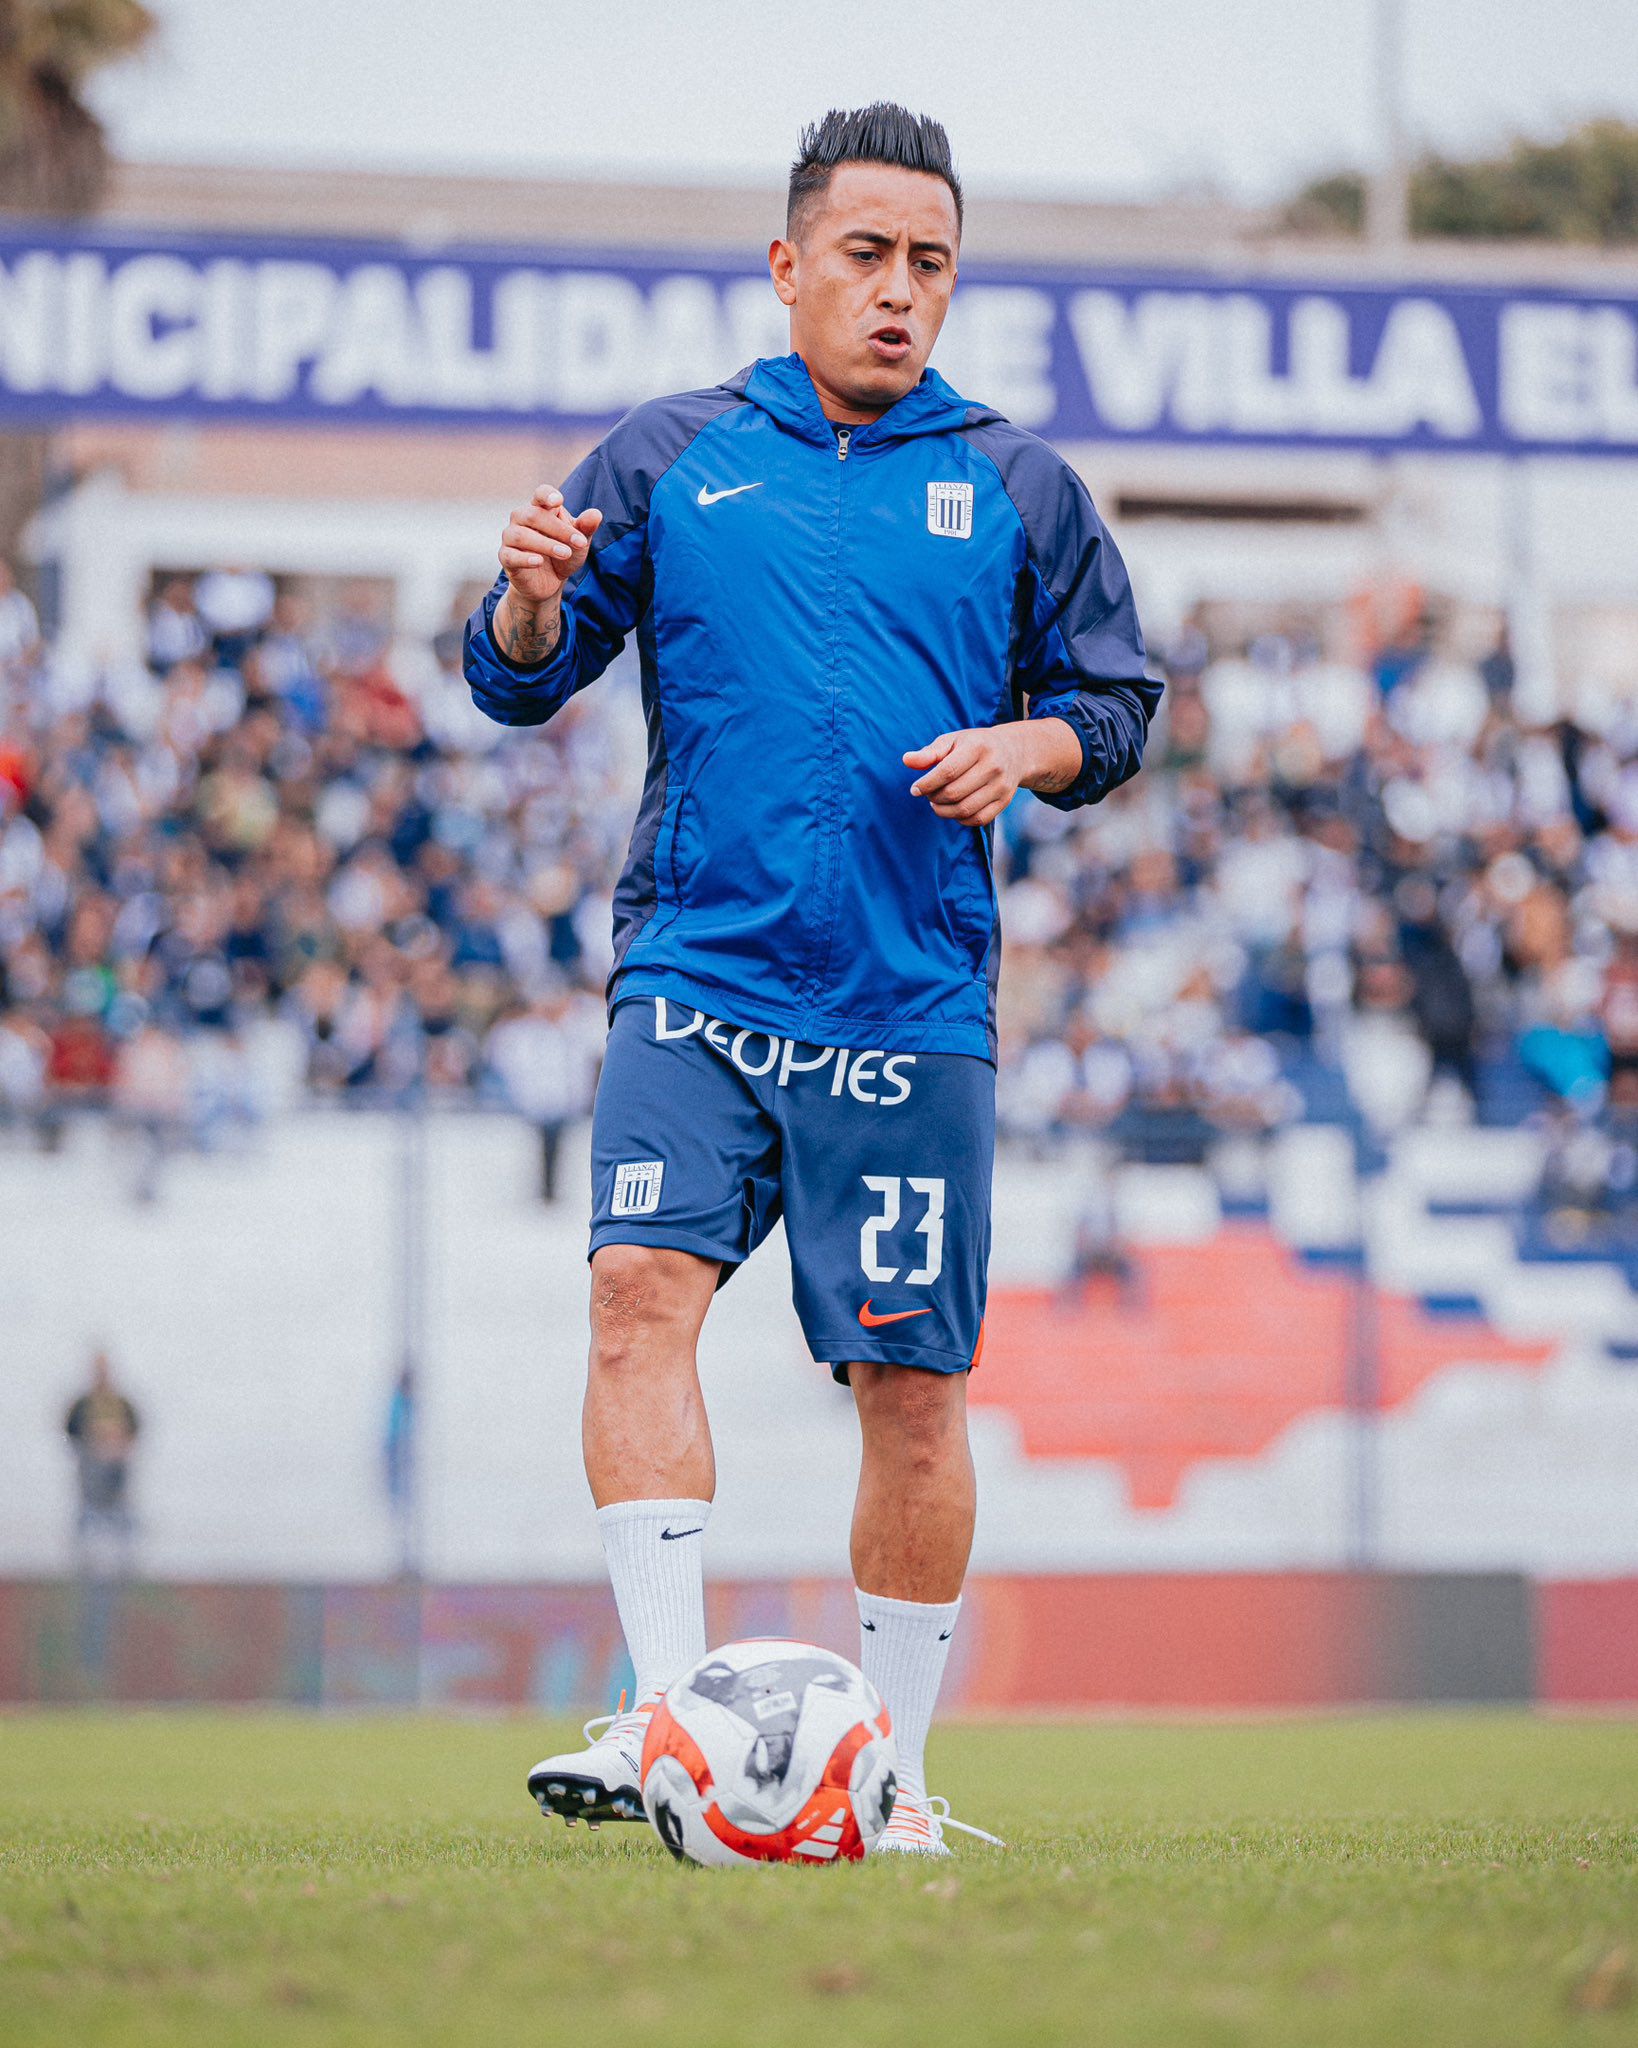 Alianza Lima vs Cantolao: Christian Cueva is the starter and does pre-competitive work